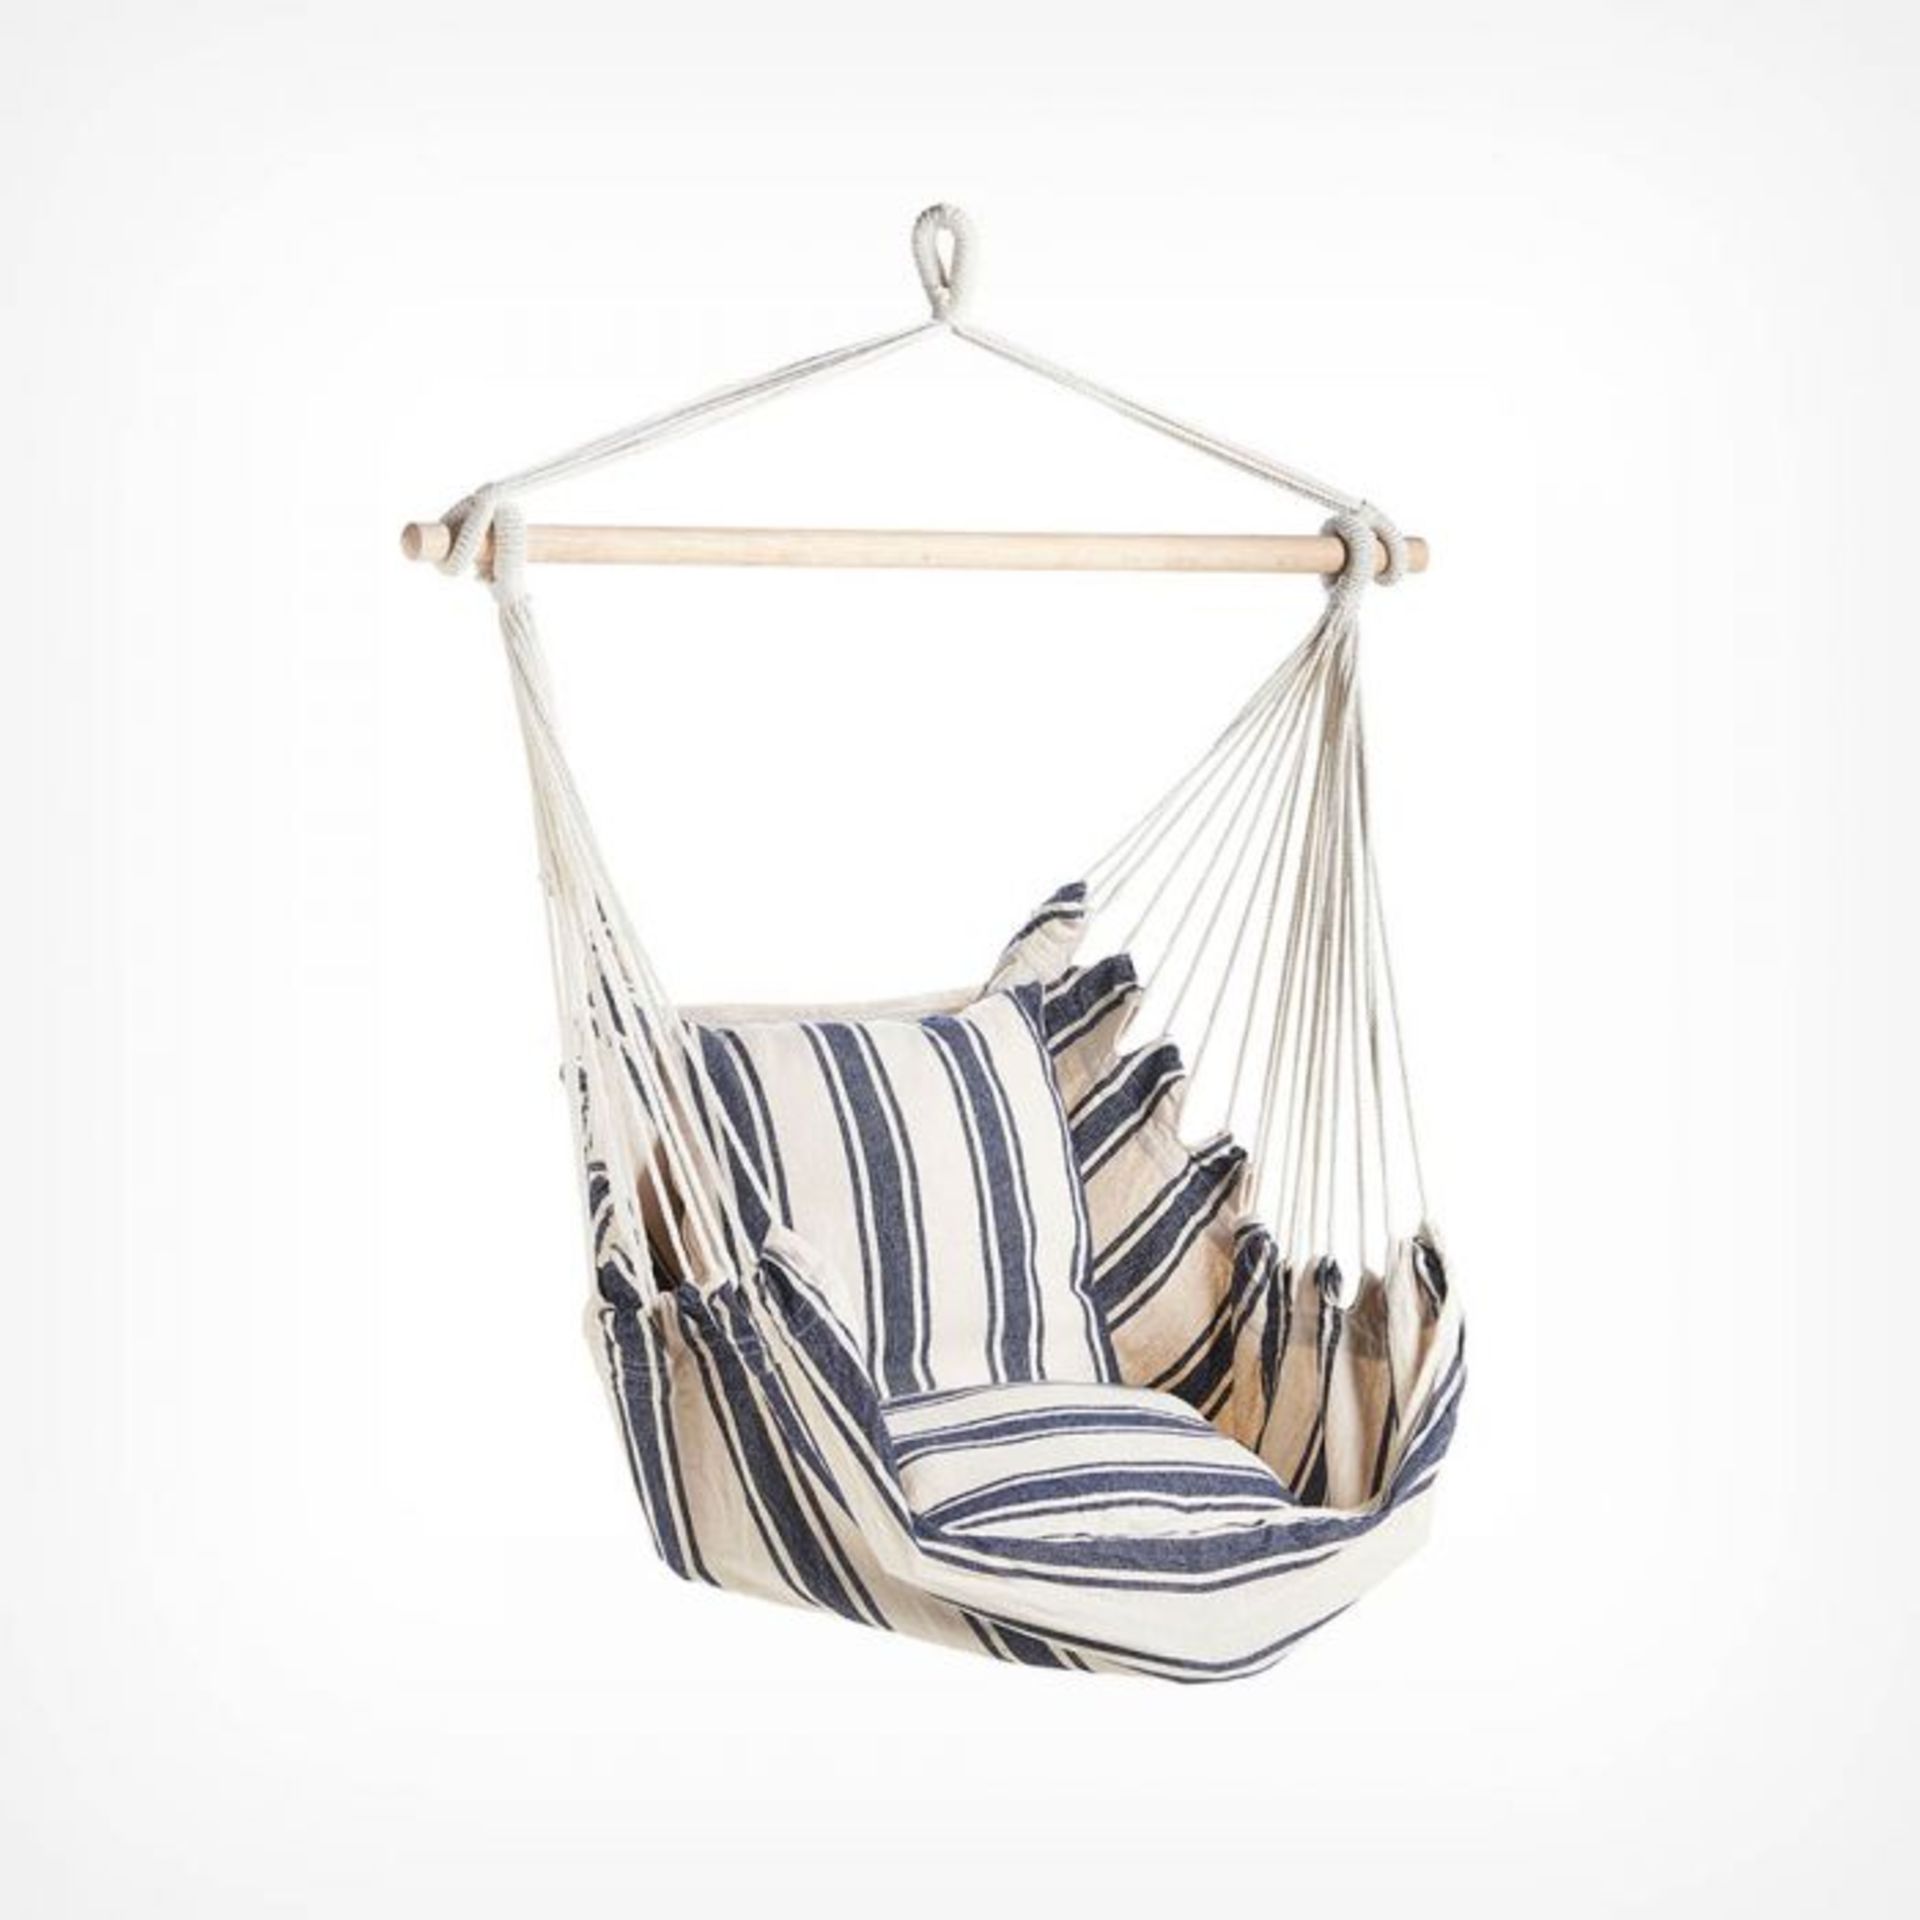 Striped Hanging Garden Chair. An alternative to the traditional hammock, this hanging chair offers